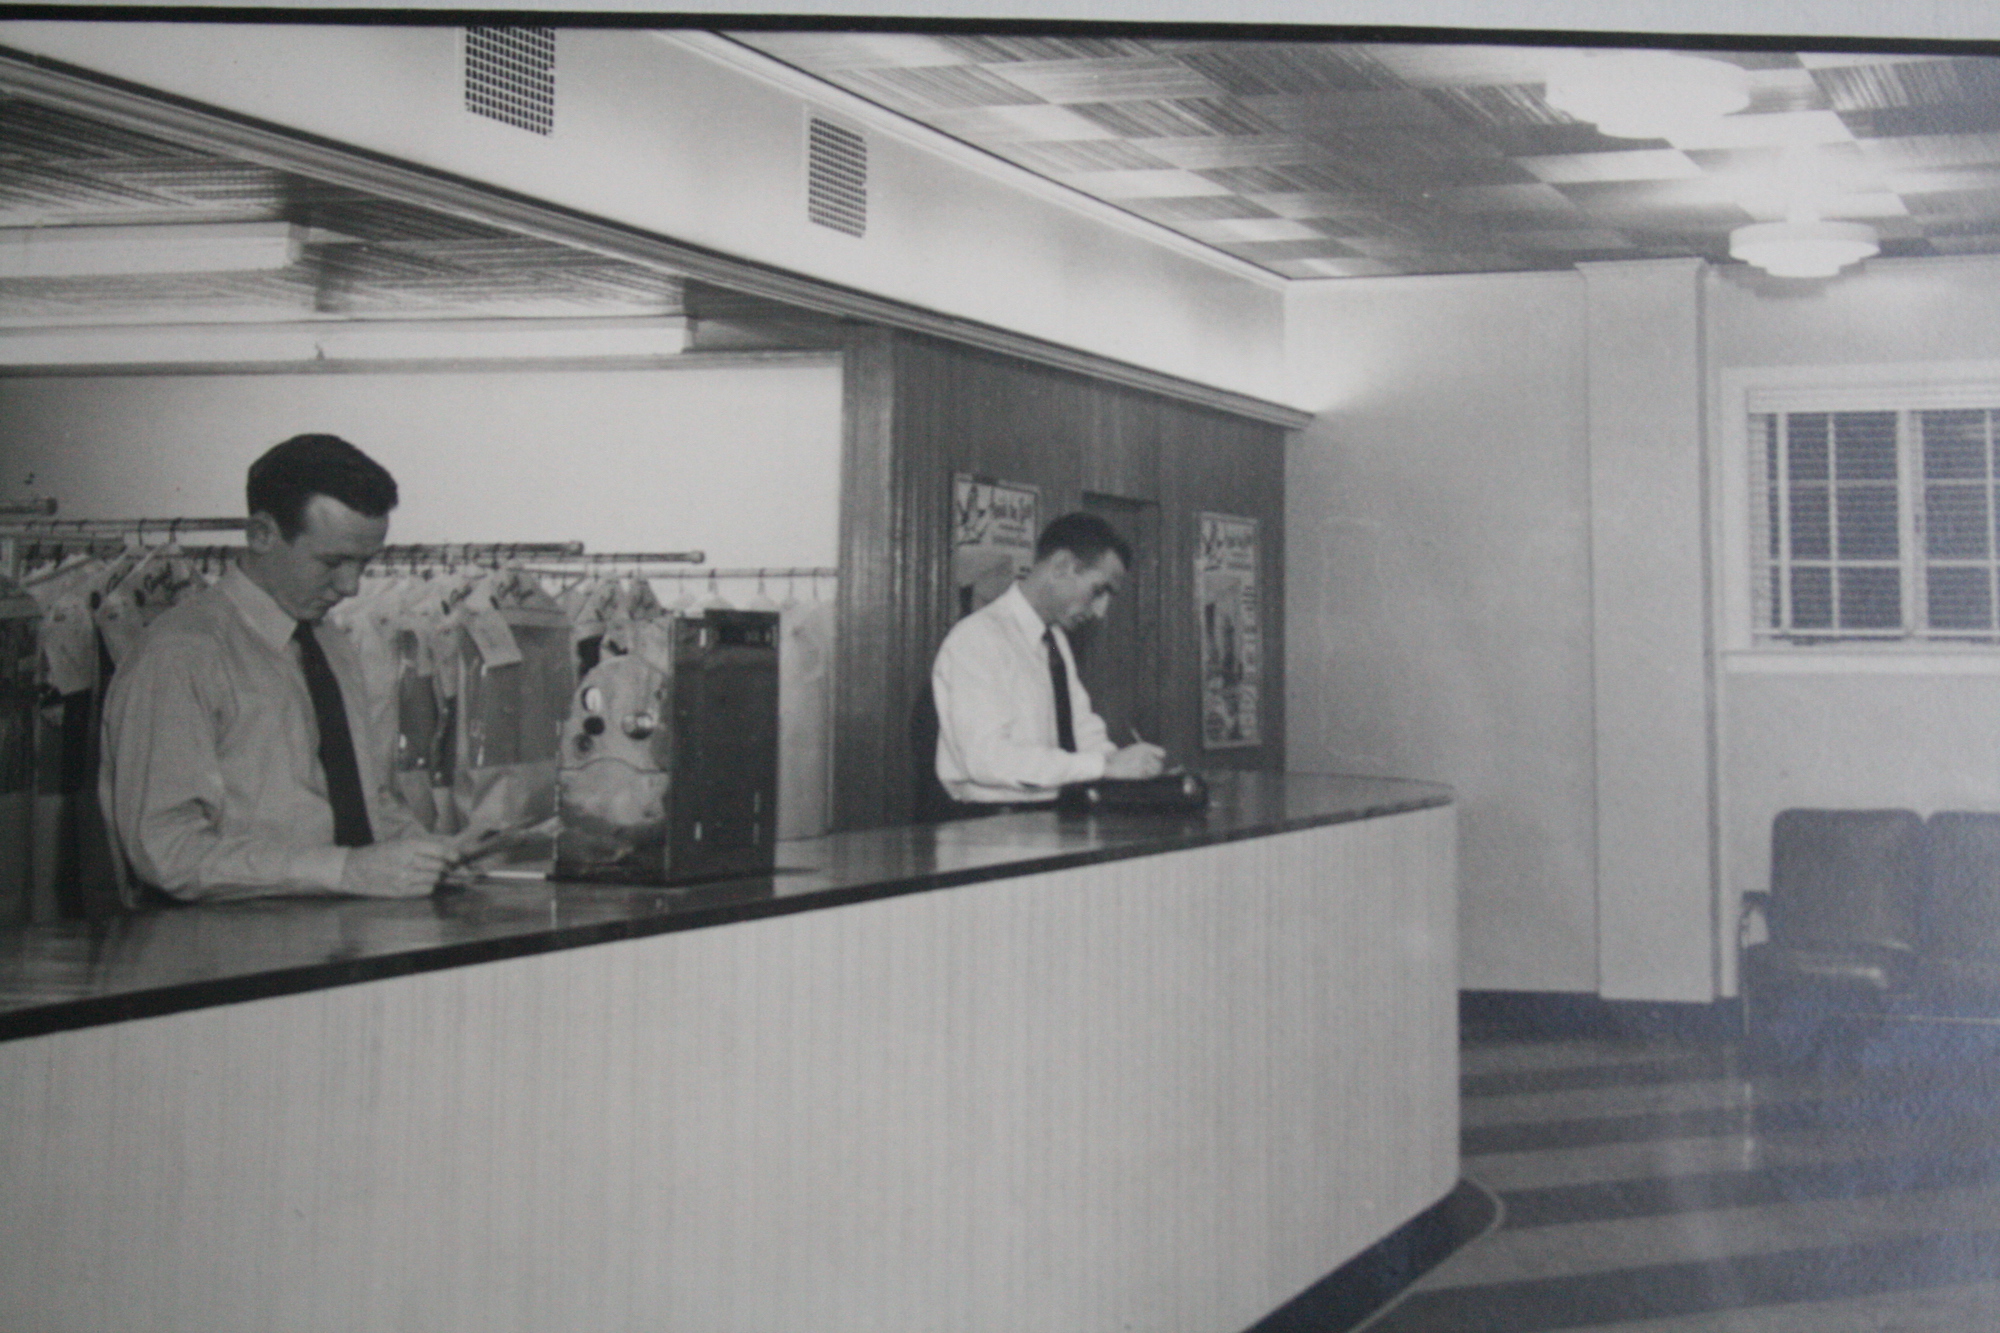 Interior of Baxter's Cleaners in the 1960s